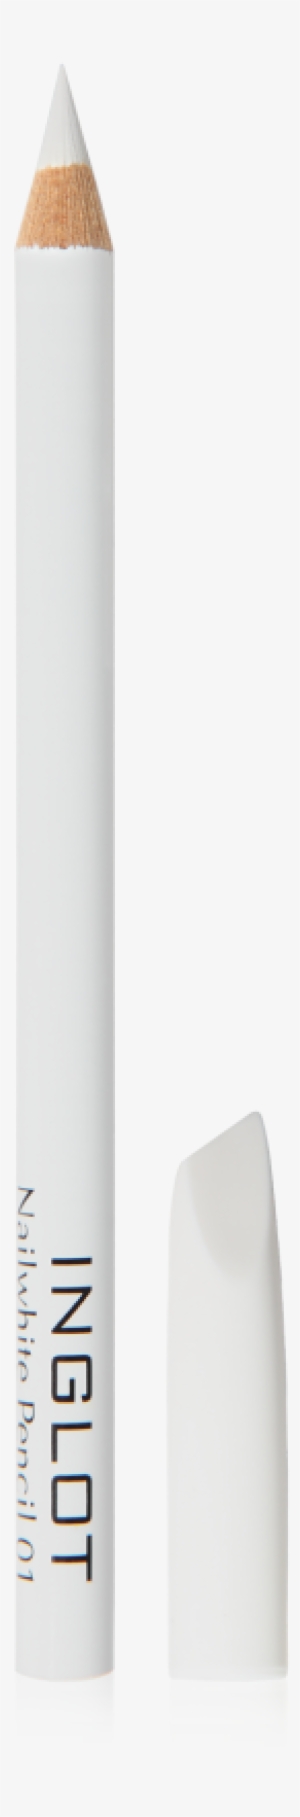 Nail White Pencil - Advent Candle